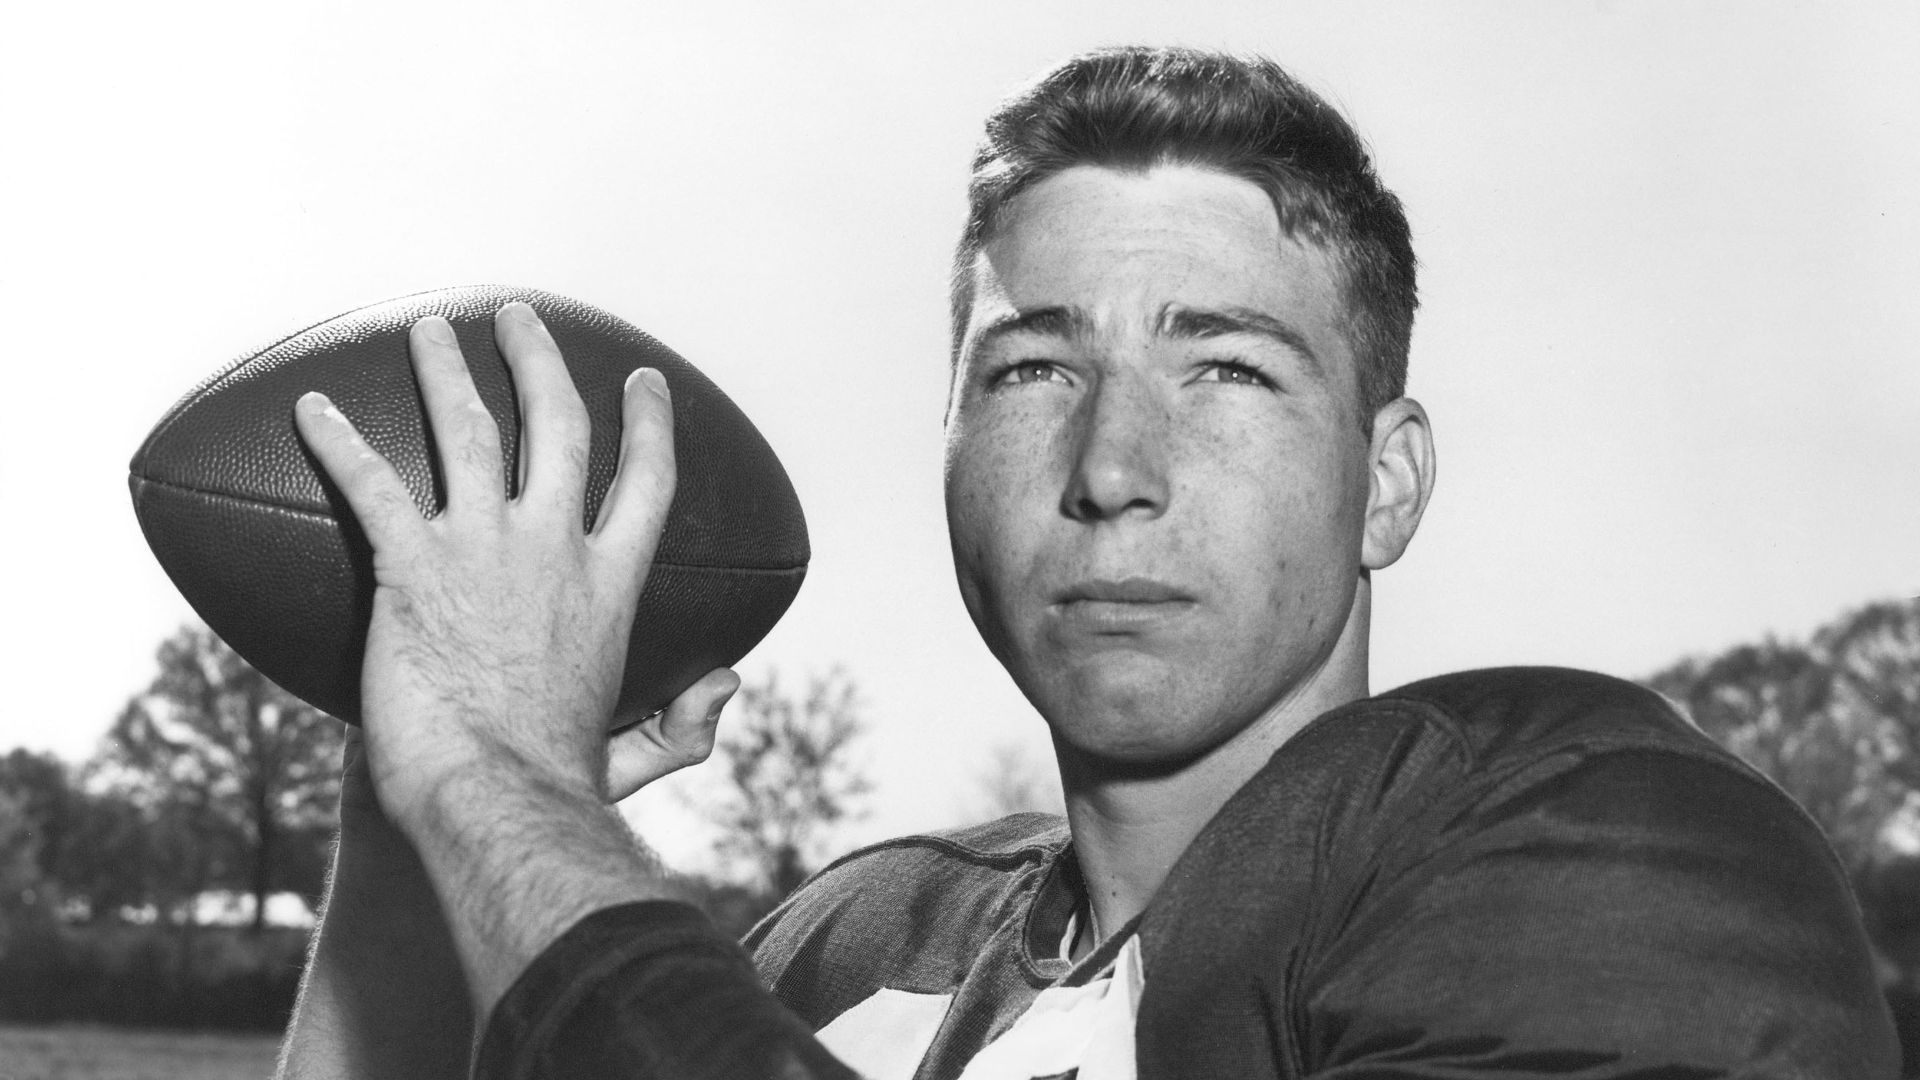 NFL legend Bart Starr's back issues due to Alabama hazing